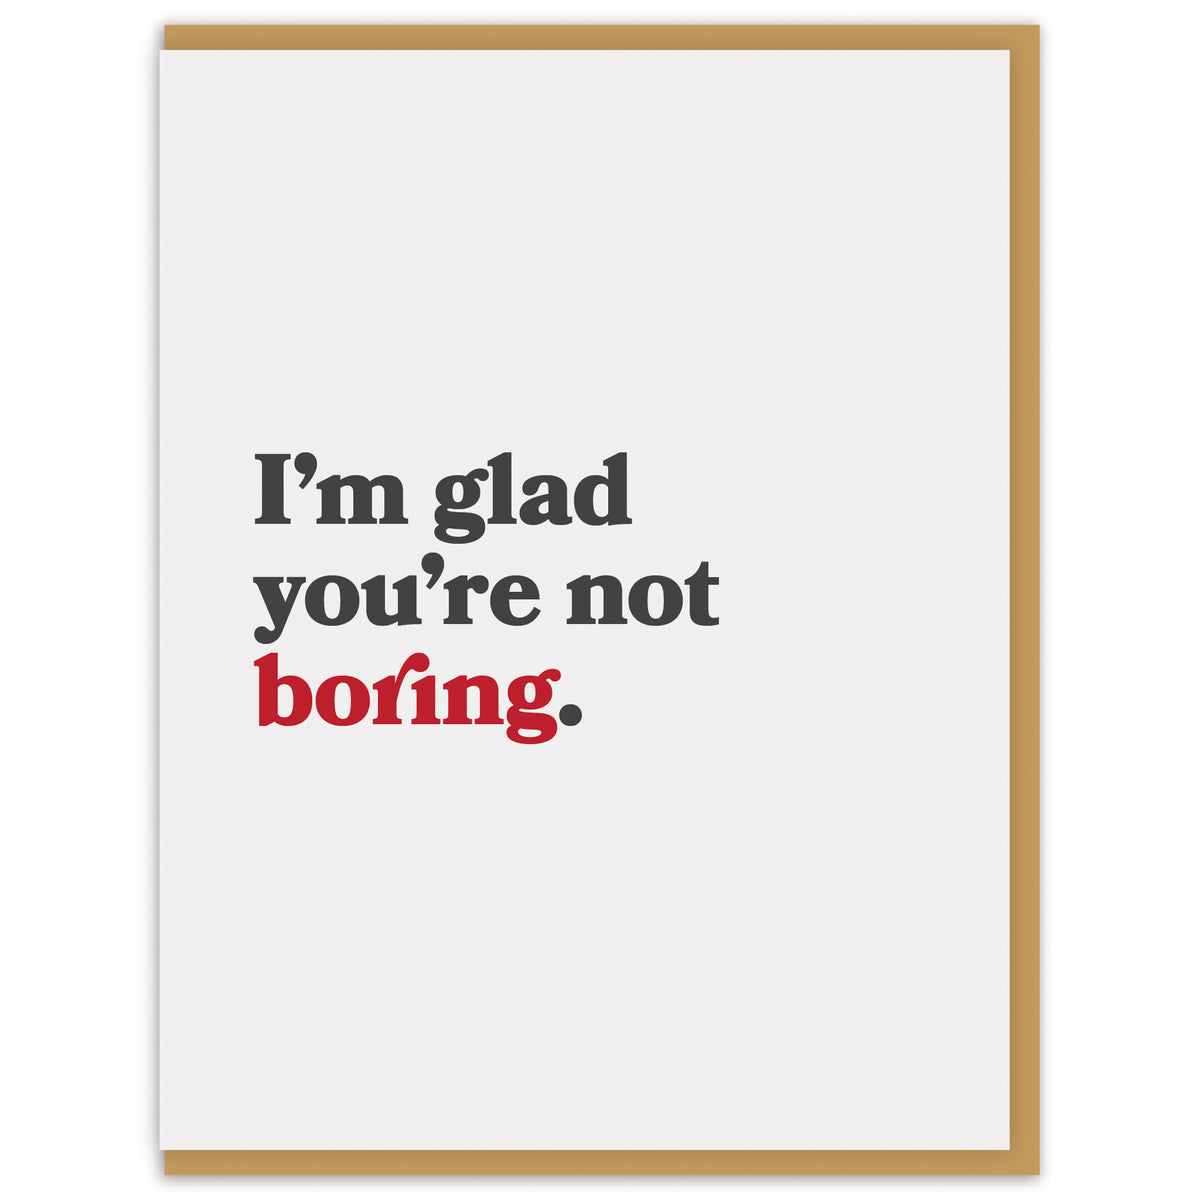 I’m glad you’re not boring.